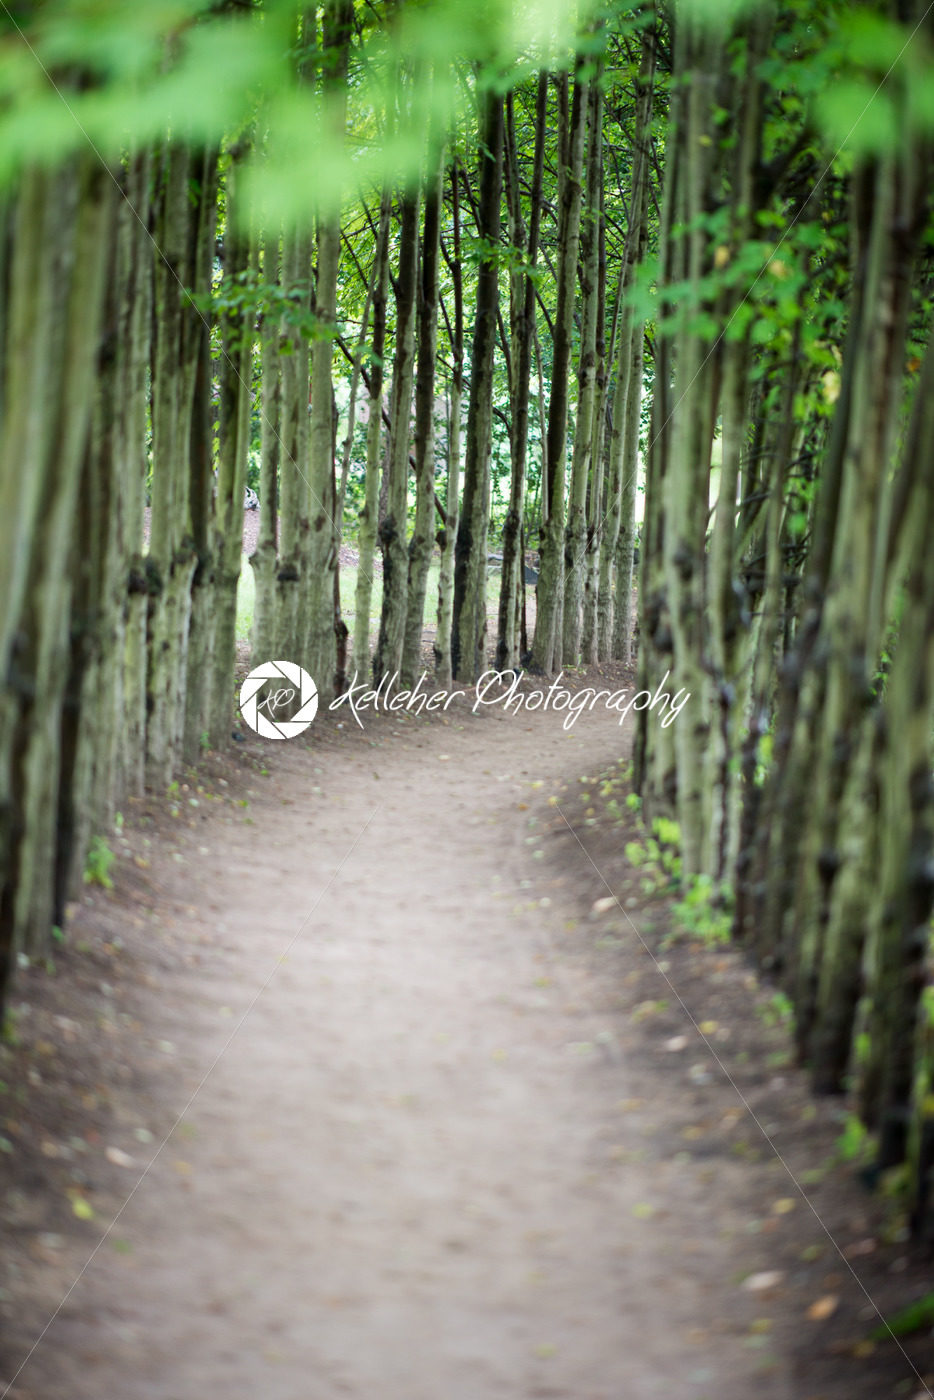 Dirt walk way path lined with thin trees on both sides - Kelleher Photography Store